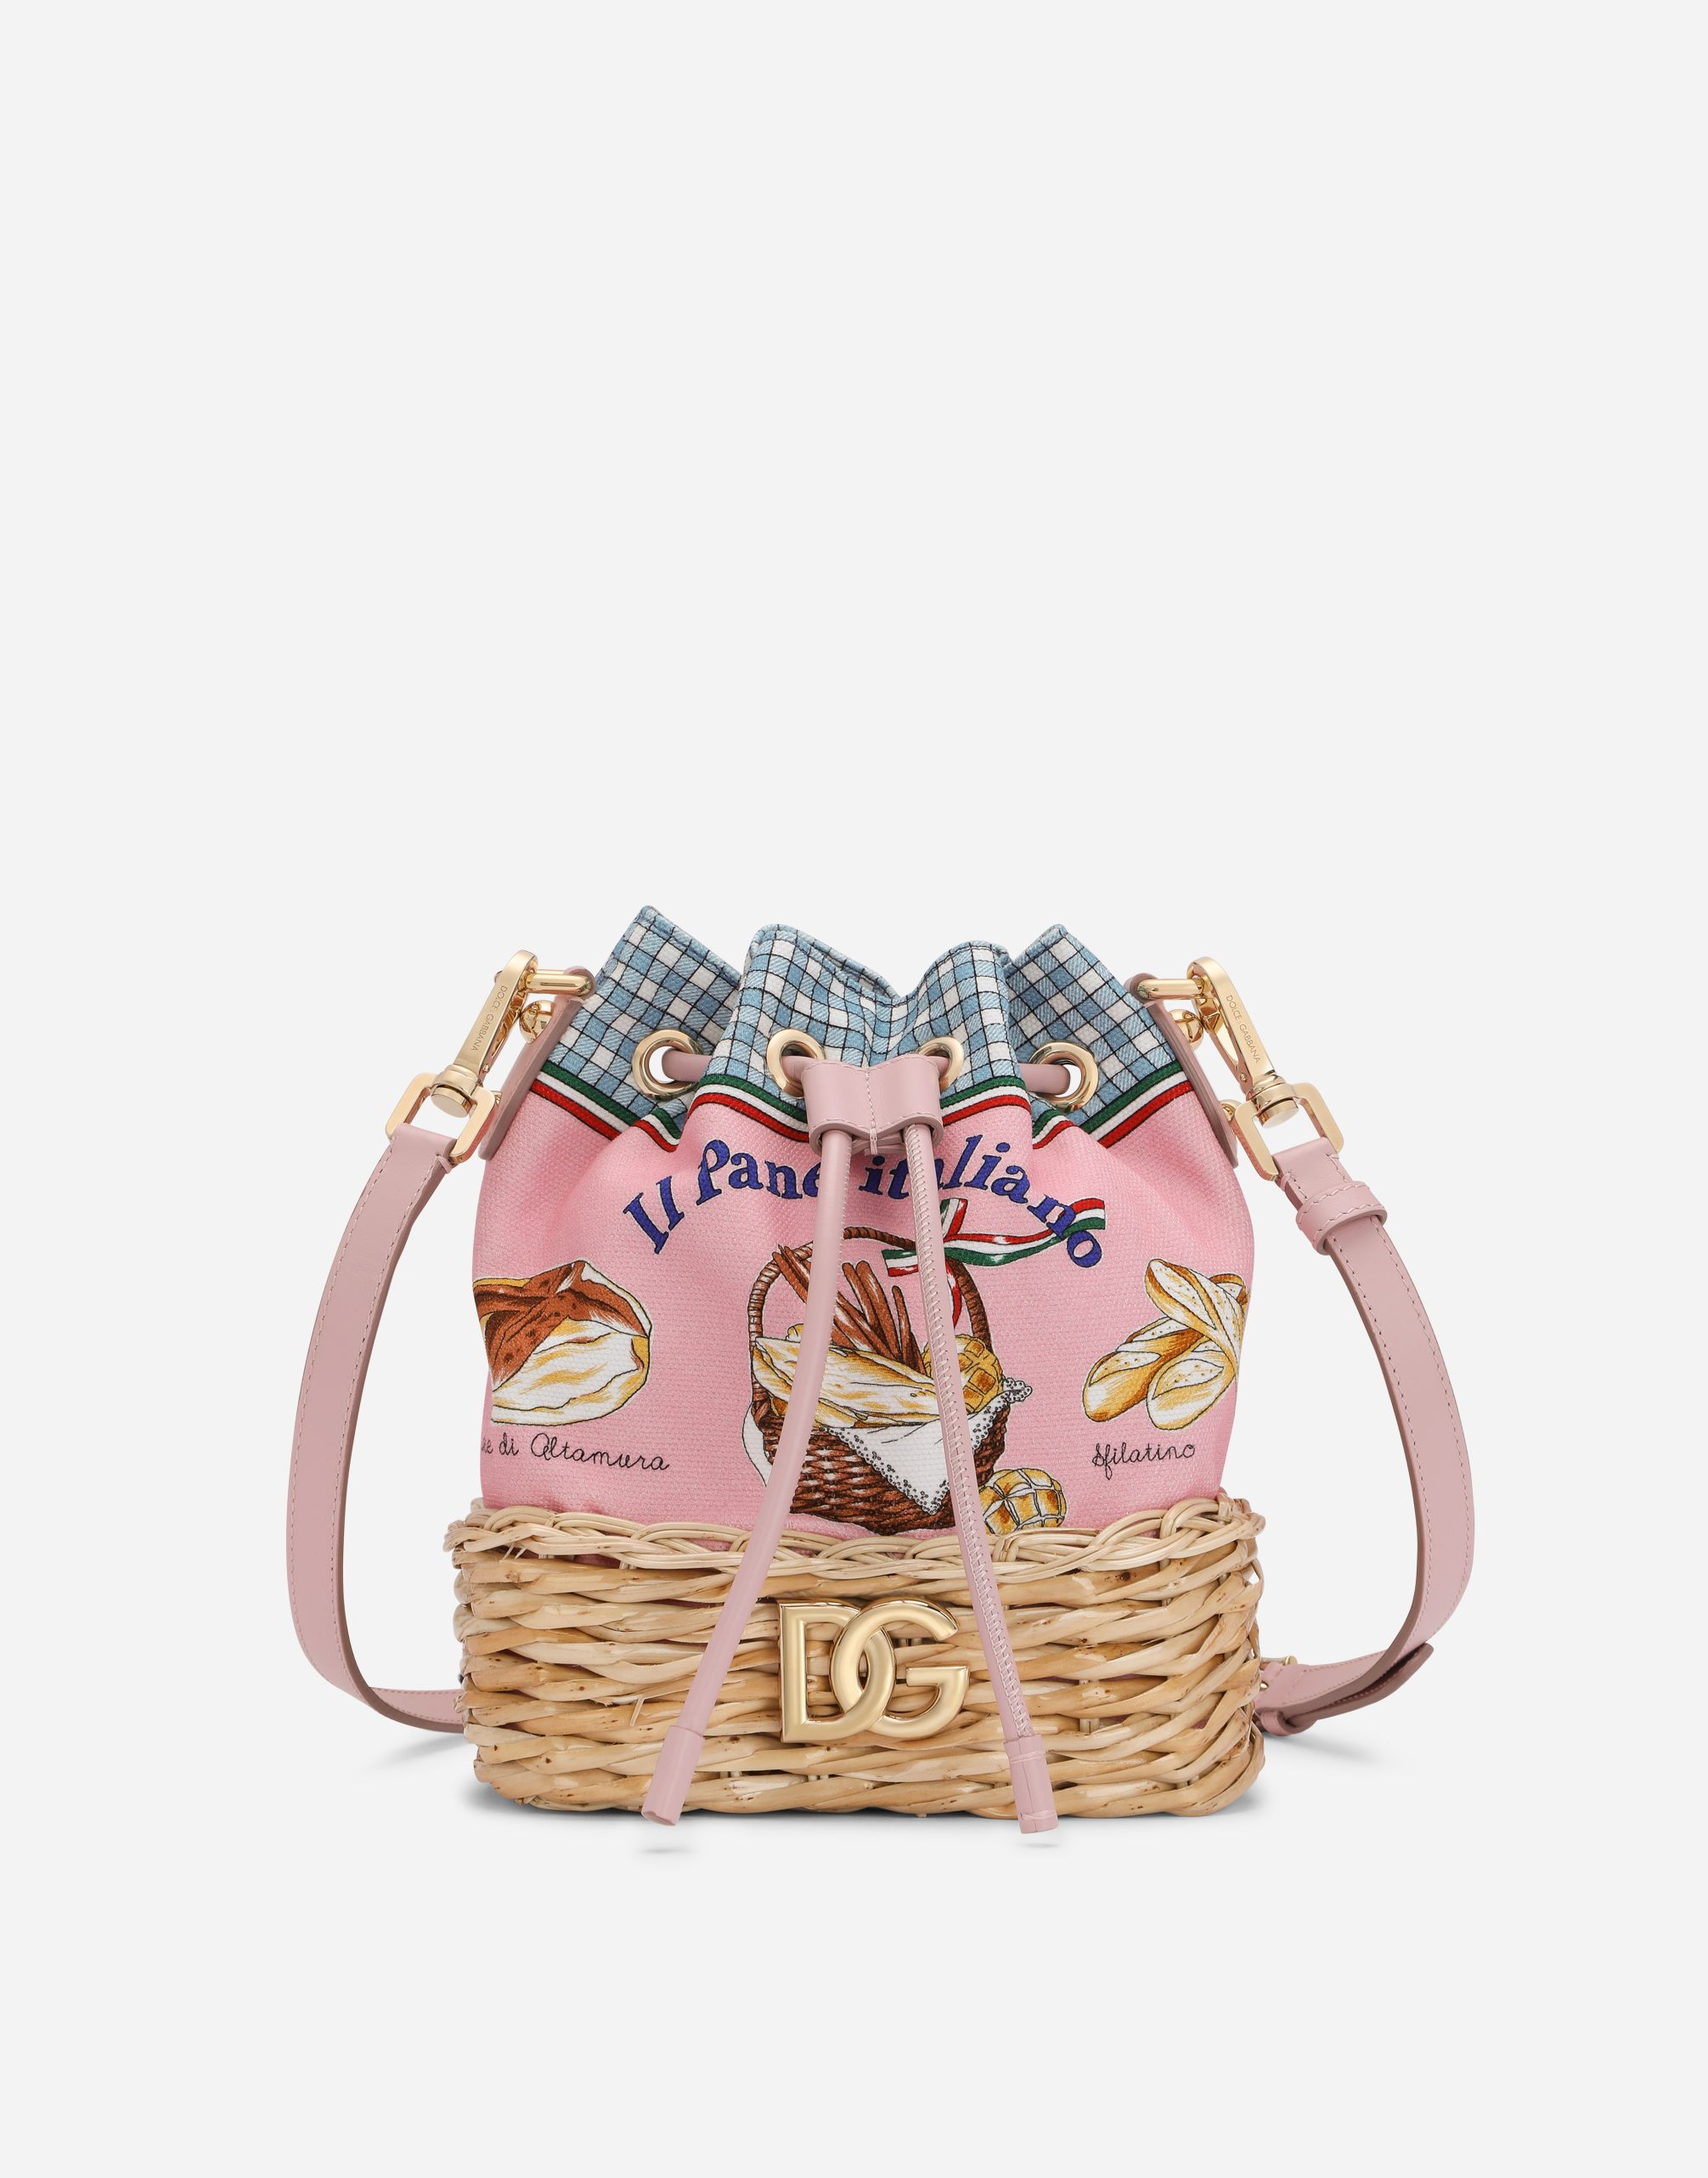 Dolce & Gabbana Printed Canvas And Wicker Bucket Bag In Multicolor